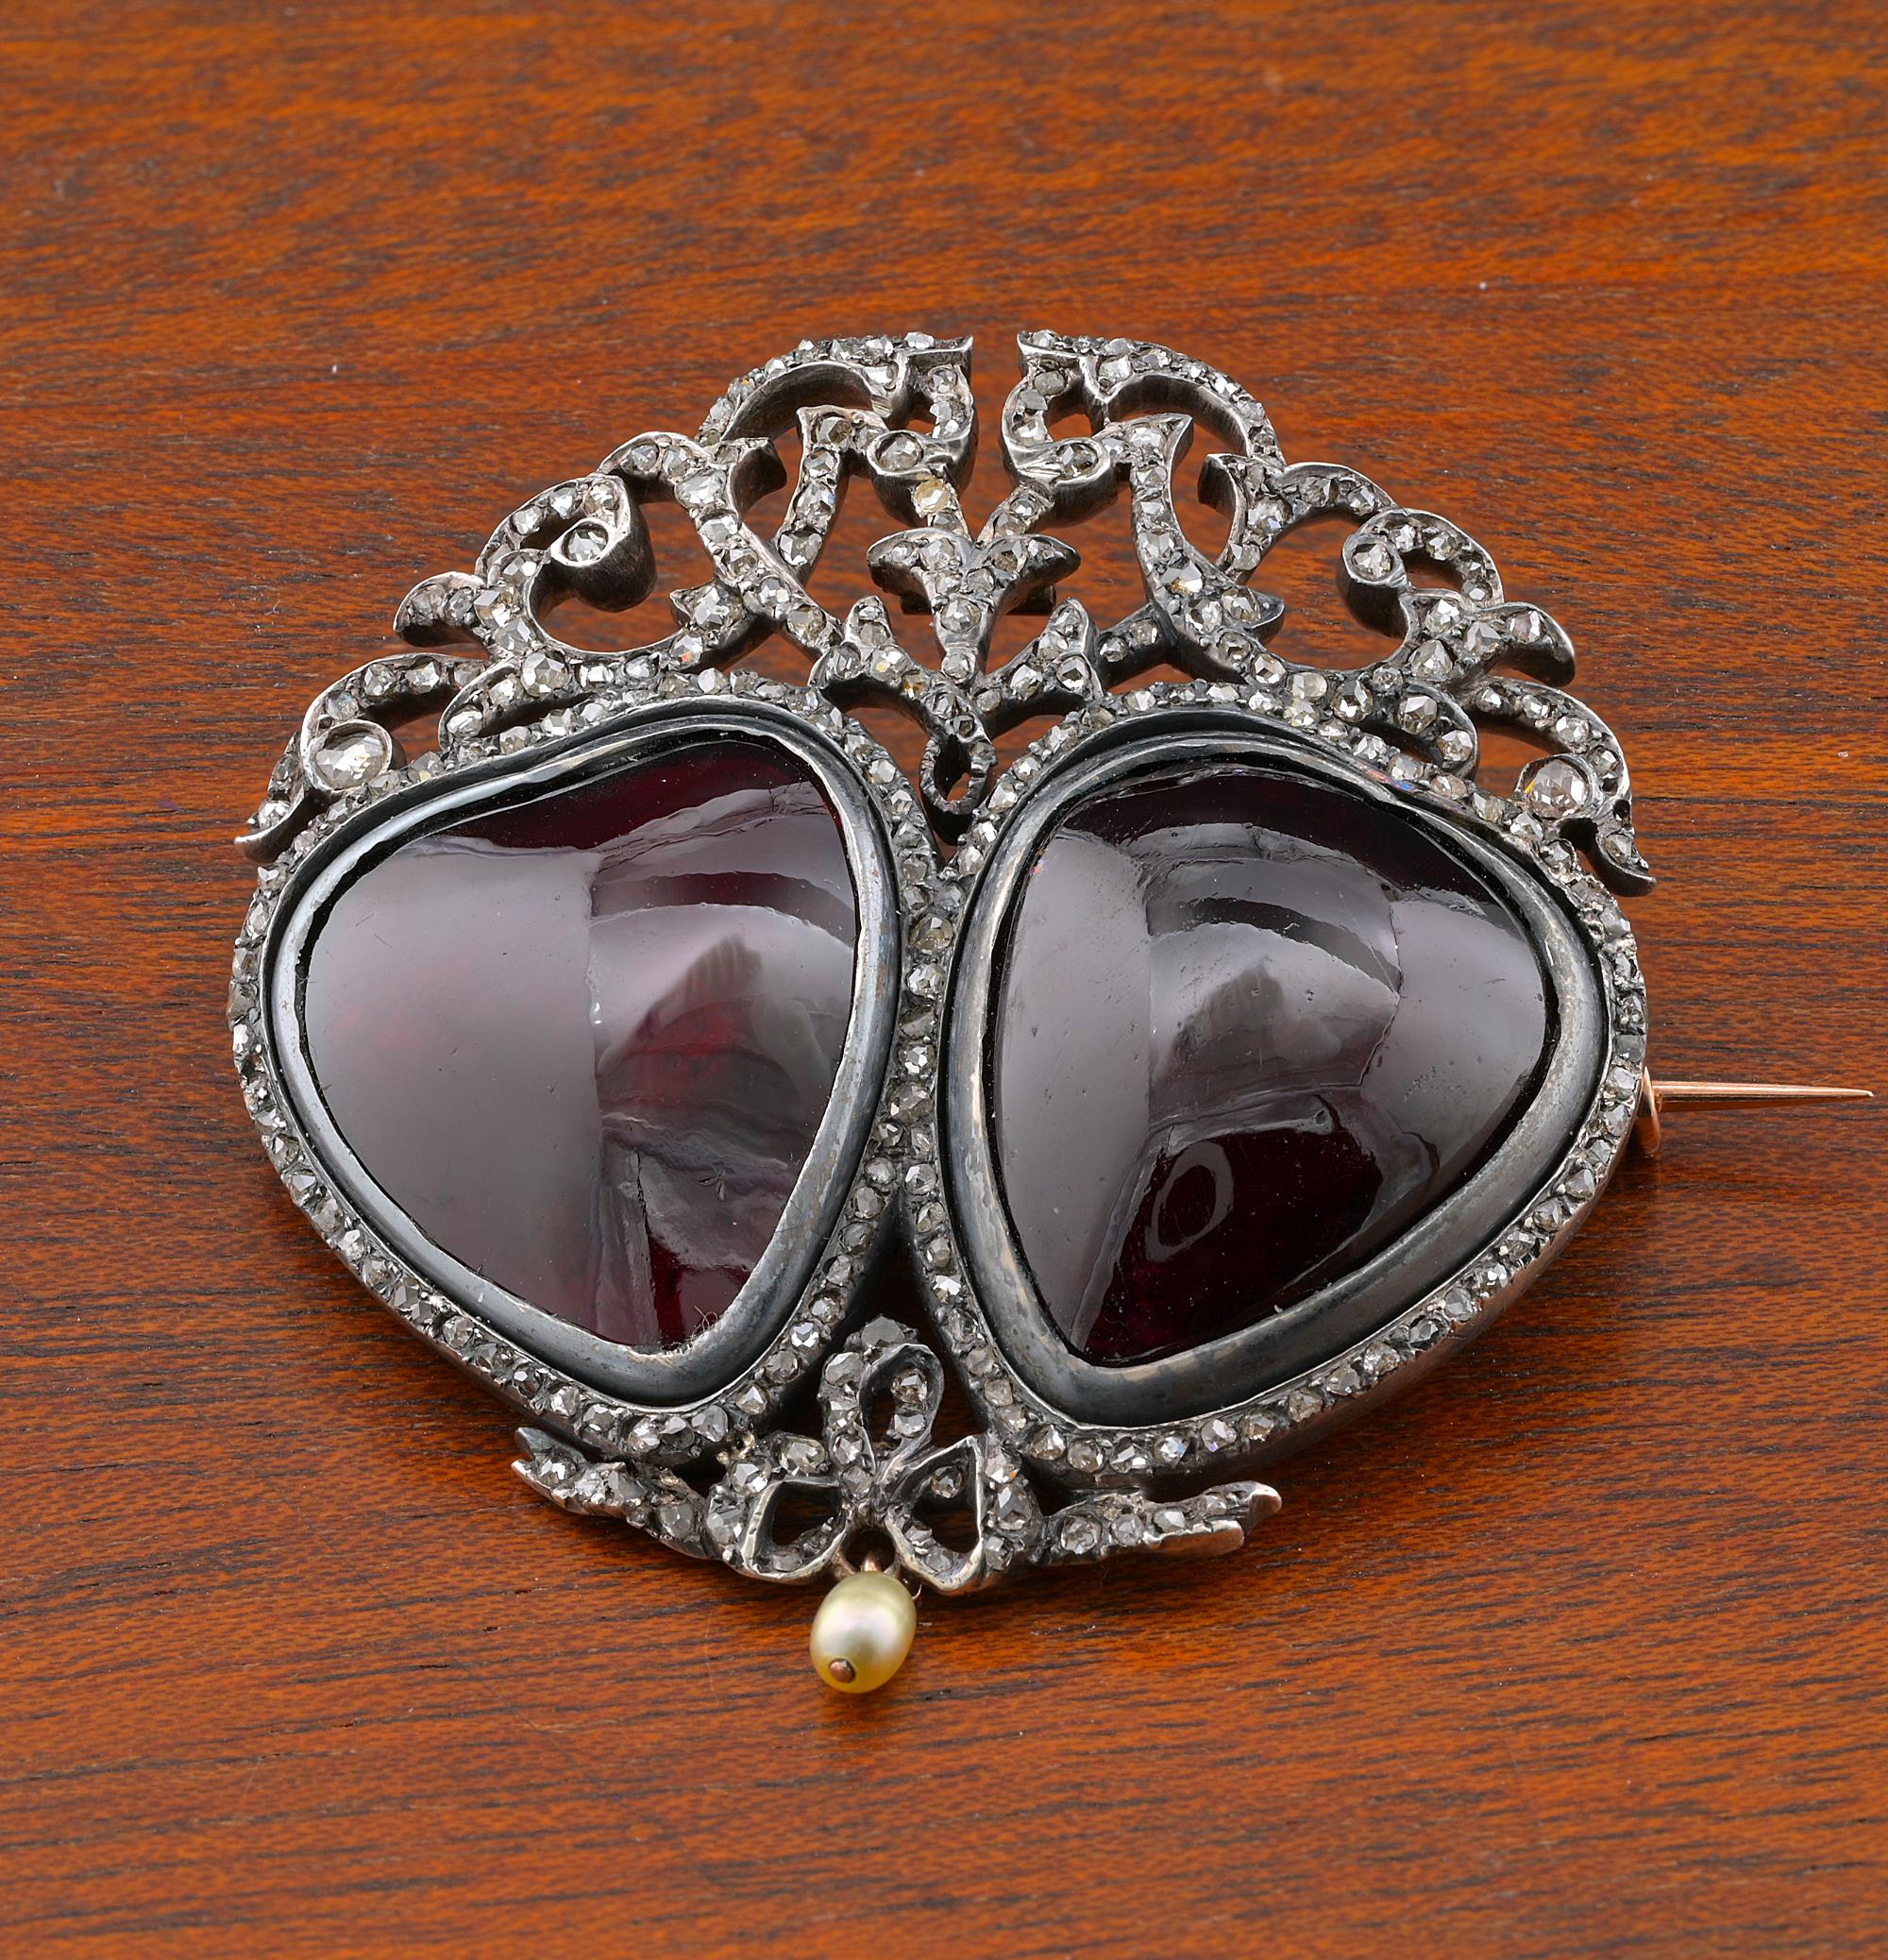 Magnificent example of Victorian sentimental brooch, dated 1888 engraved on the backside – bearing French import duty marks
Glorious artwork skillfully hand crafted of solid 18 KT rose gold and silver
Two large hearts as symbol of eternal love meet